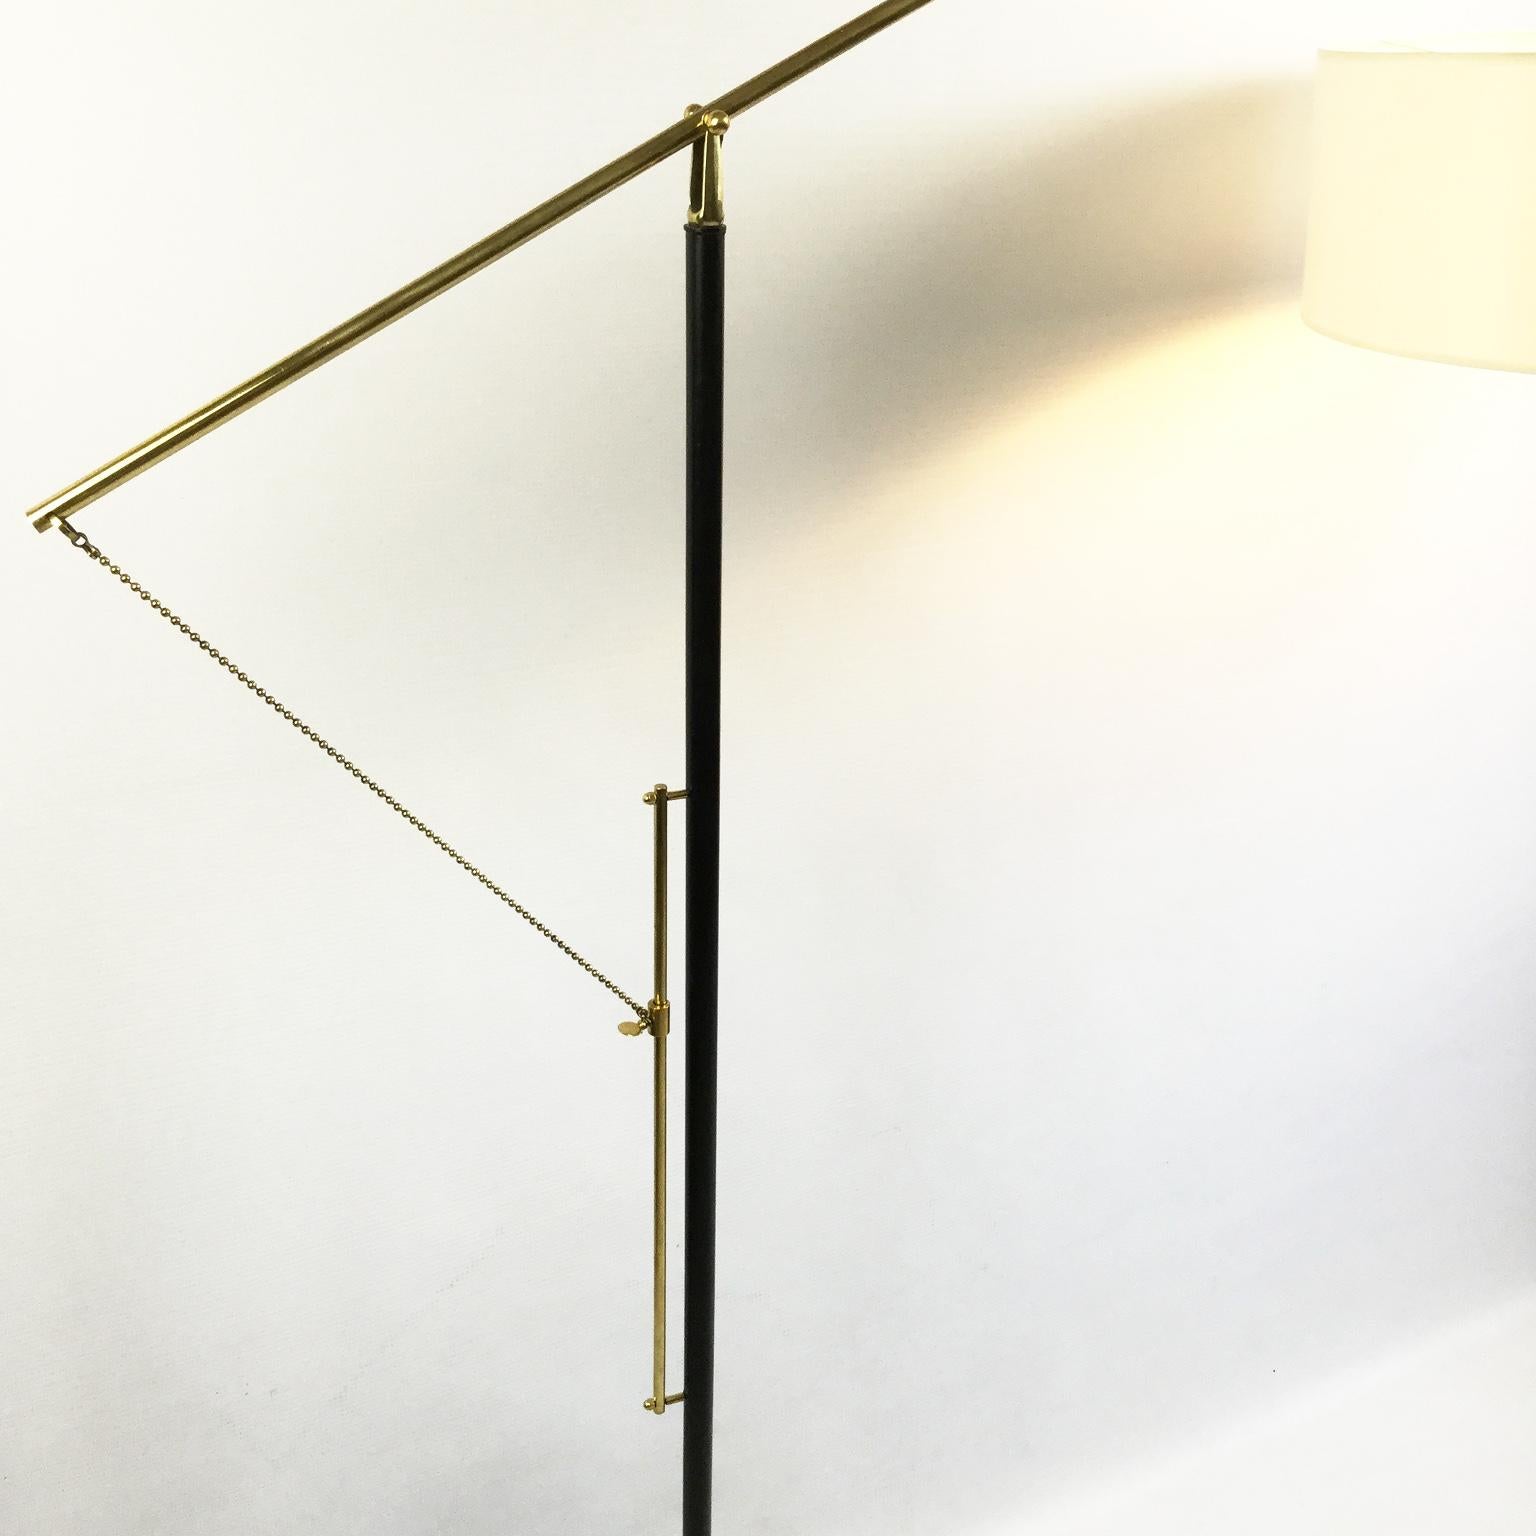 French Maison Arlus Floor Lamp with Adjustable Brass Pendant, 1950s